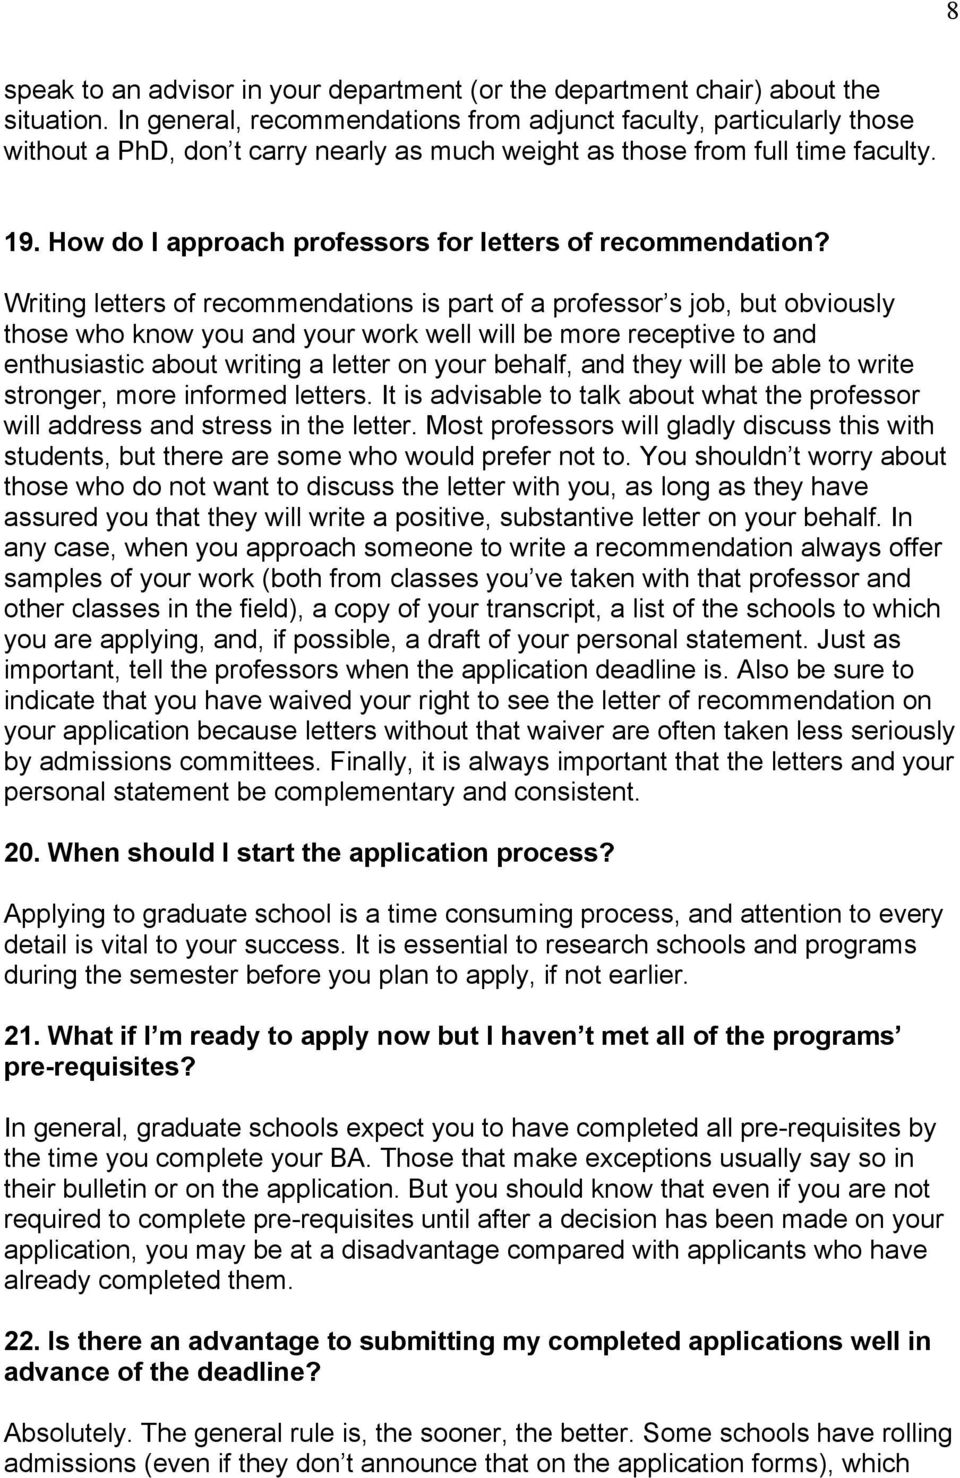 How do I approach professors for letters of recommendation?